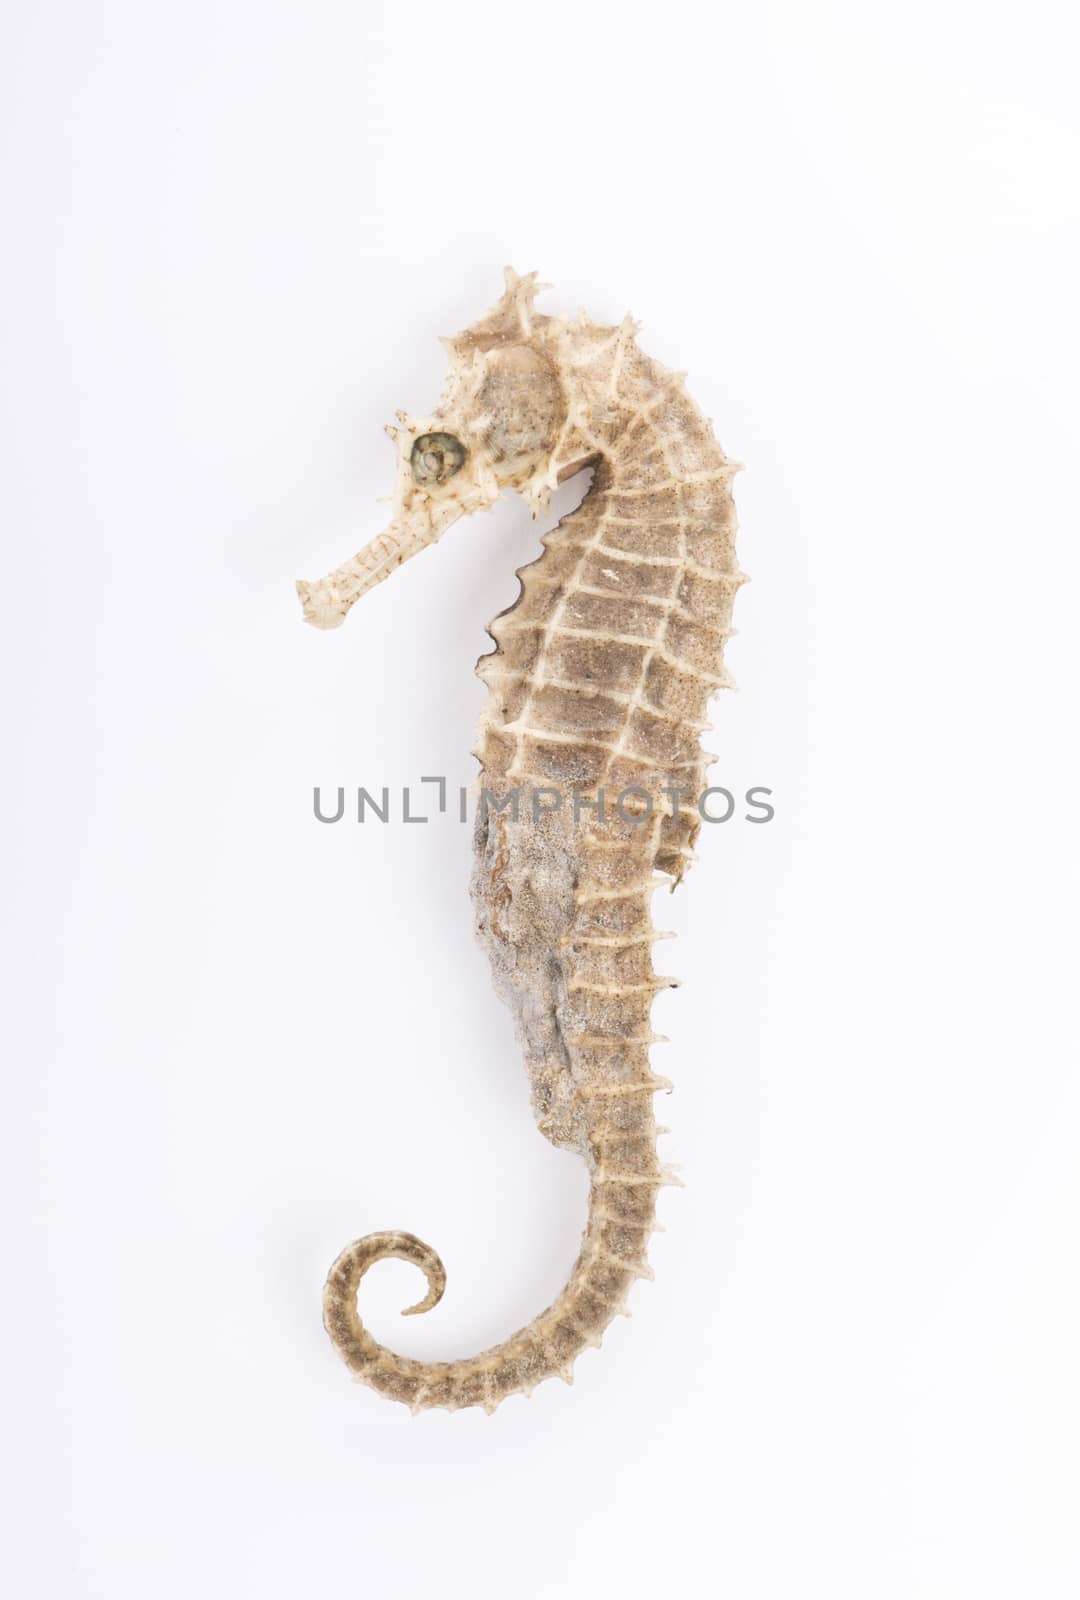 Seahorse in front of white background isolated  by marius_dragne